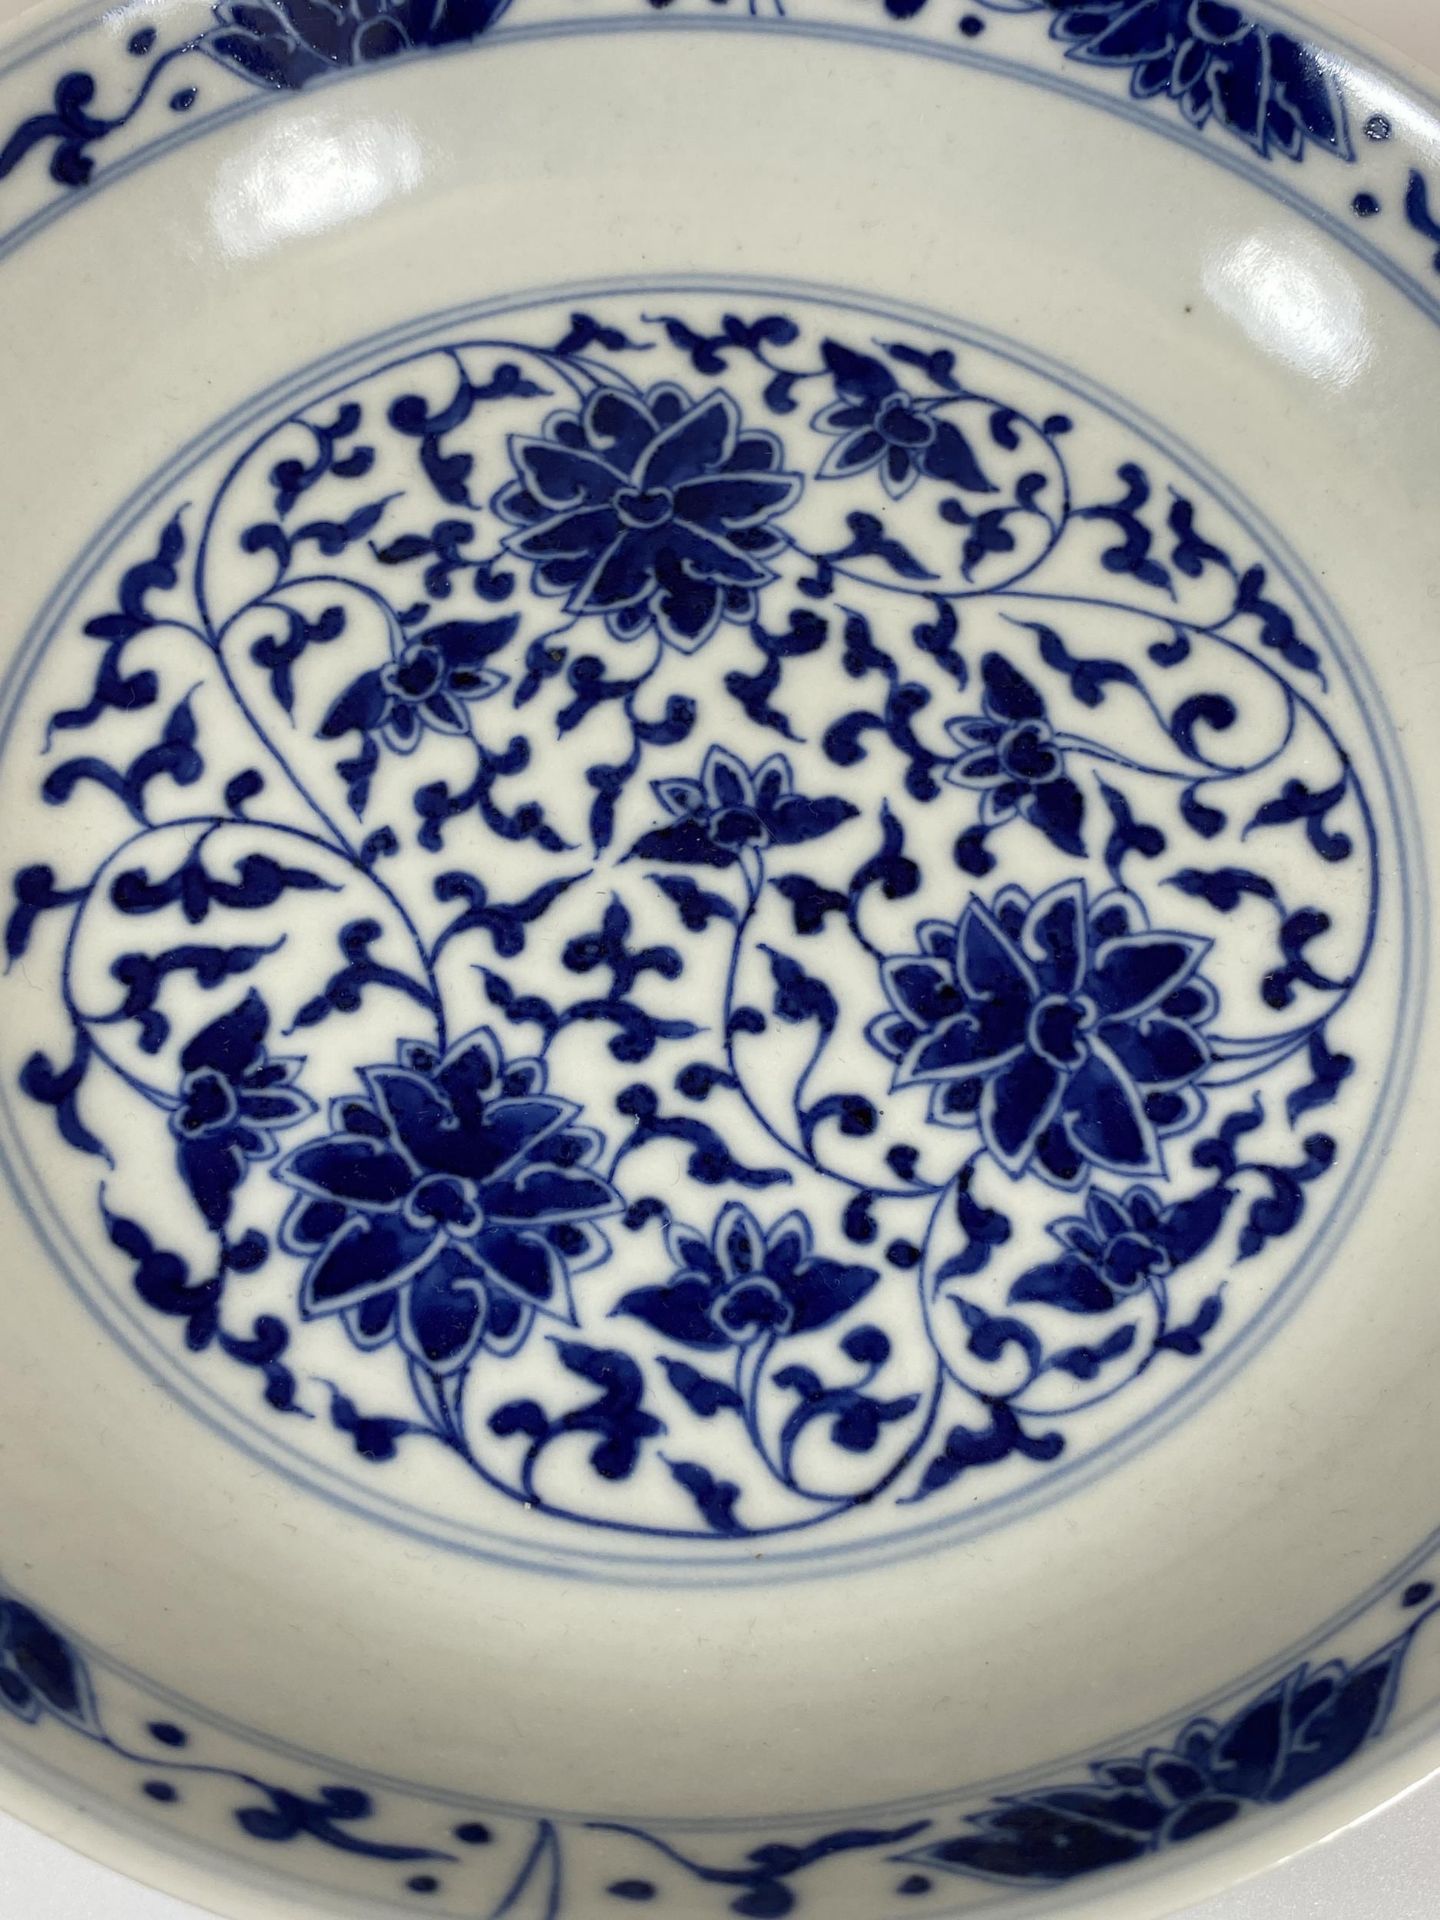 A CHINESE QIANLONG STYLE BLUE AND WHITE FLORAL BOWL / DISH, SIX CHARACTER MARK TO BASE, DIAMETER - Image 2 of 6